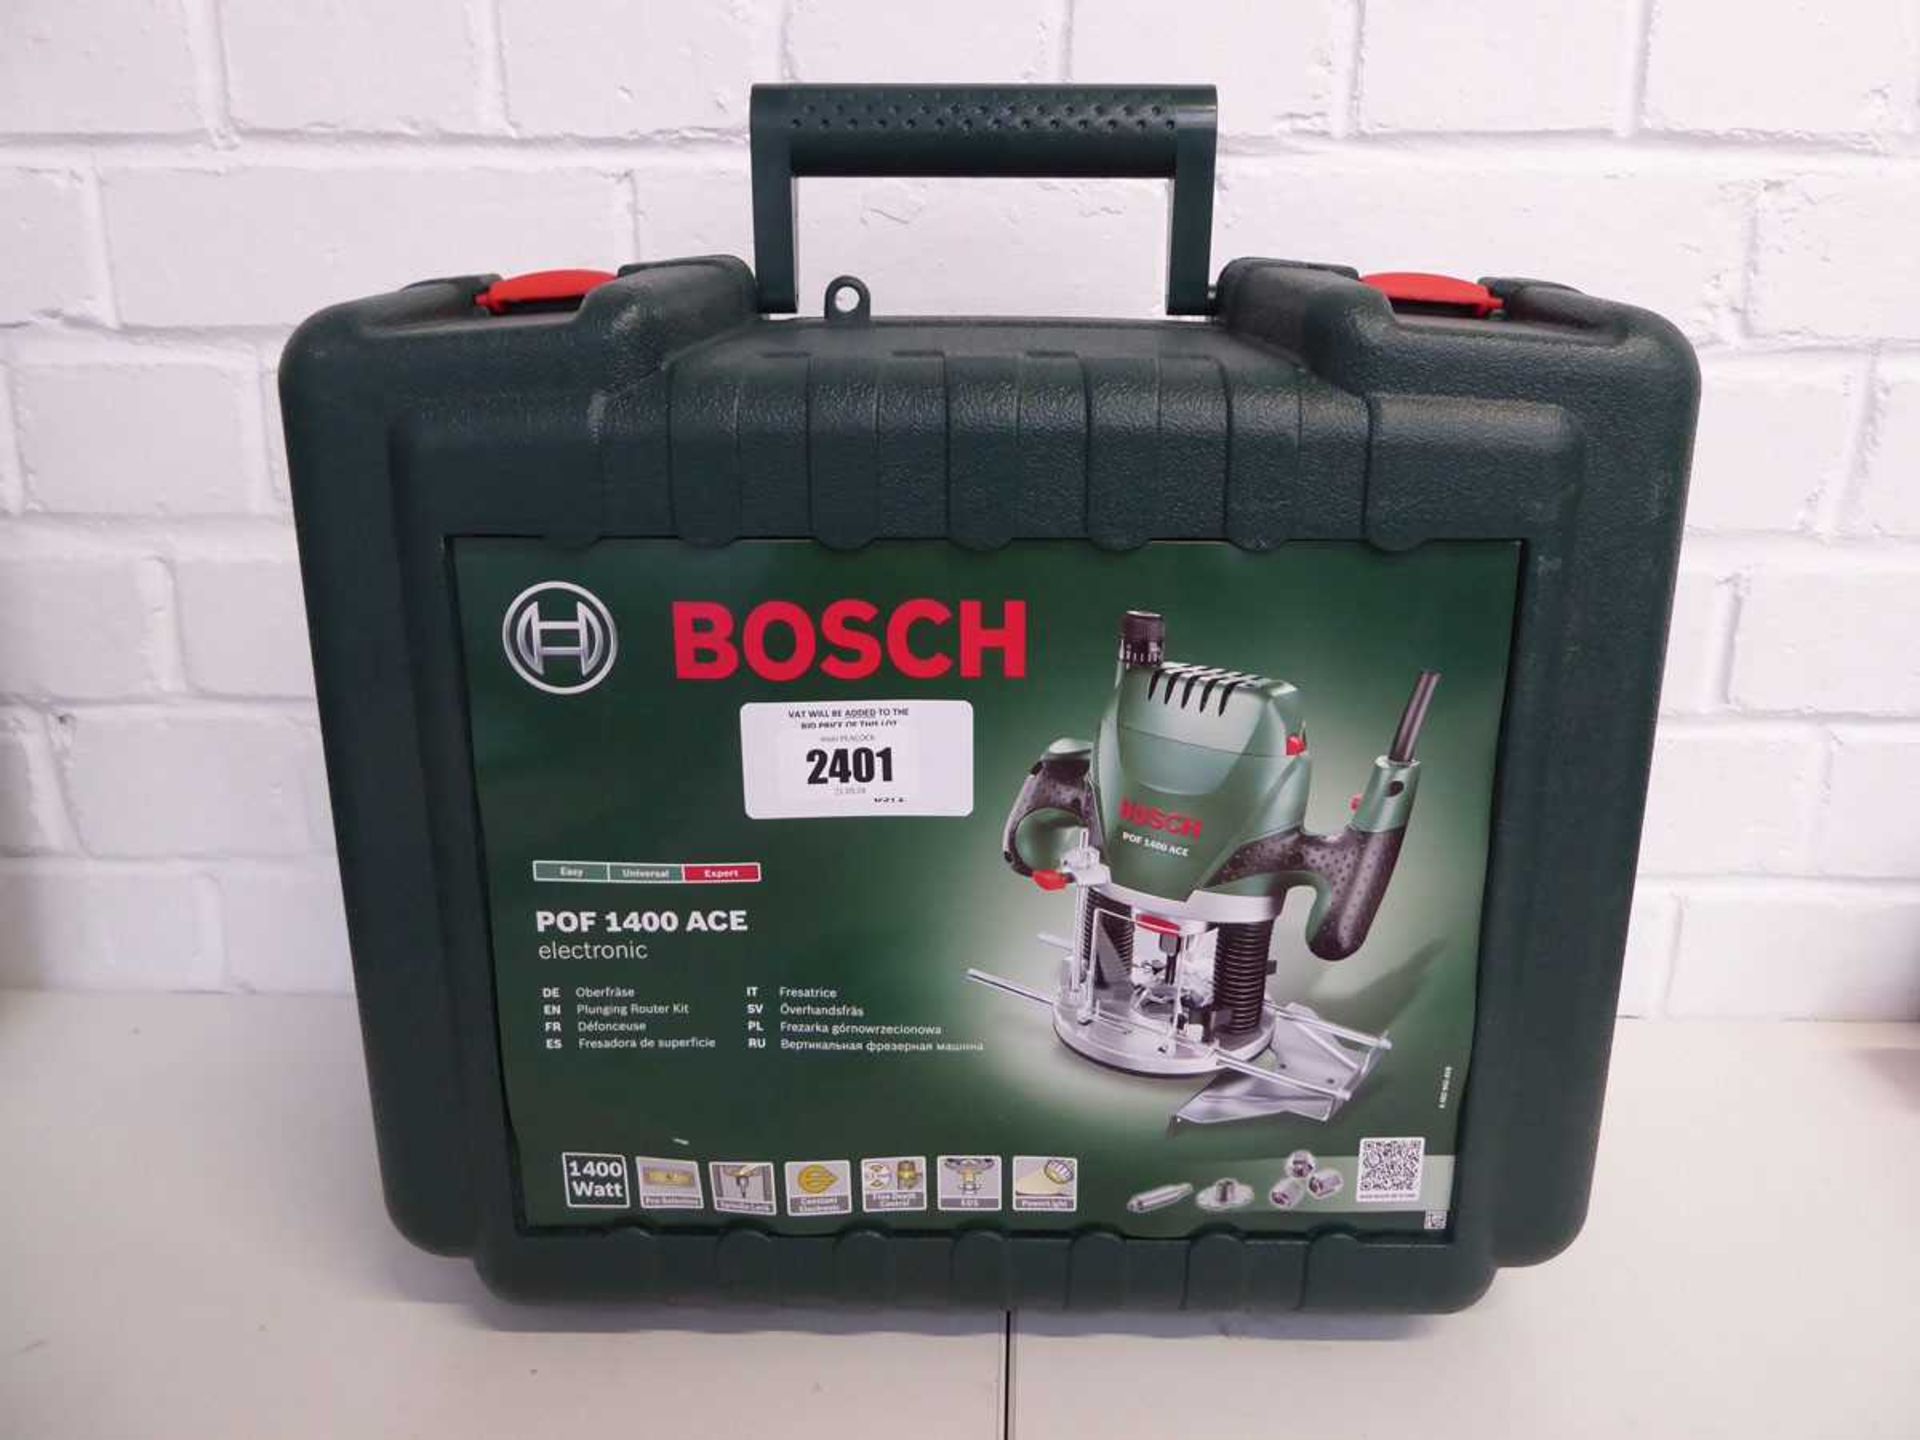 +VAT Bosch POF1400ACE electronic router tool